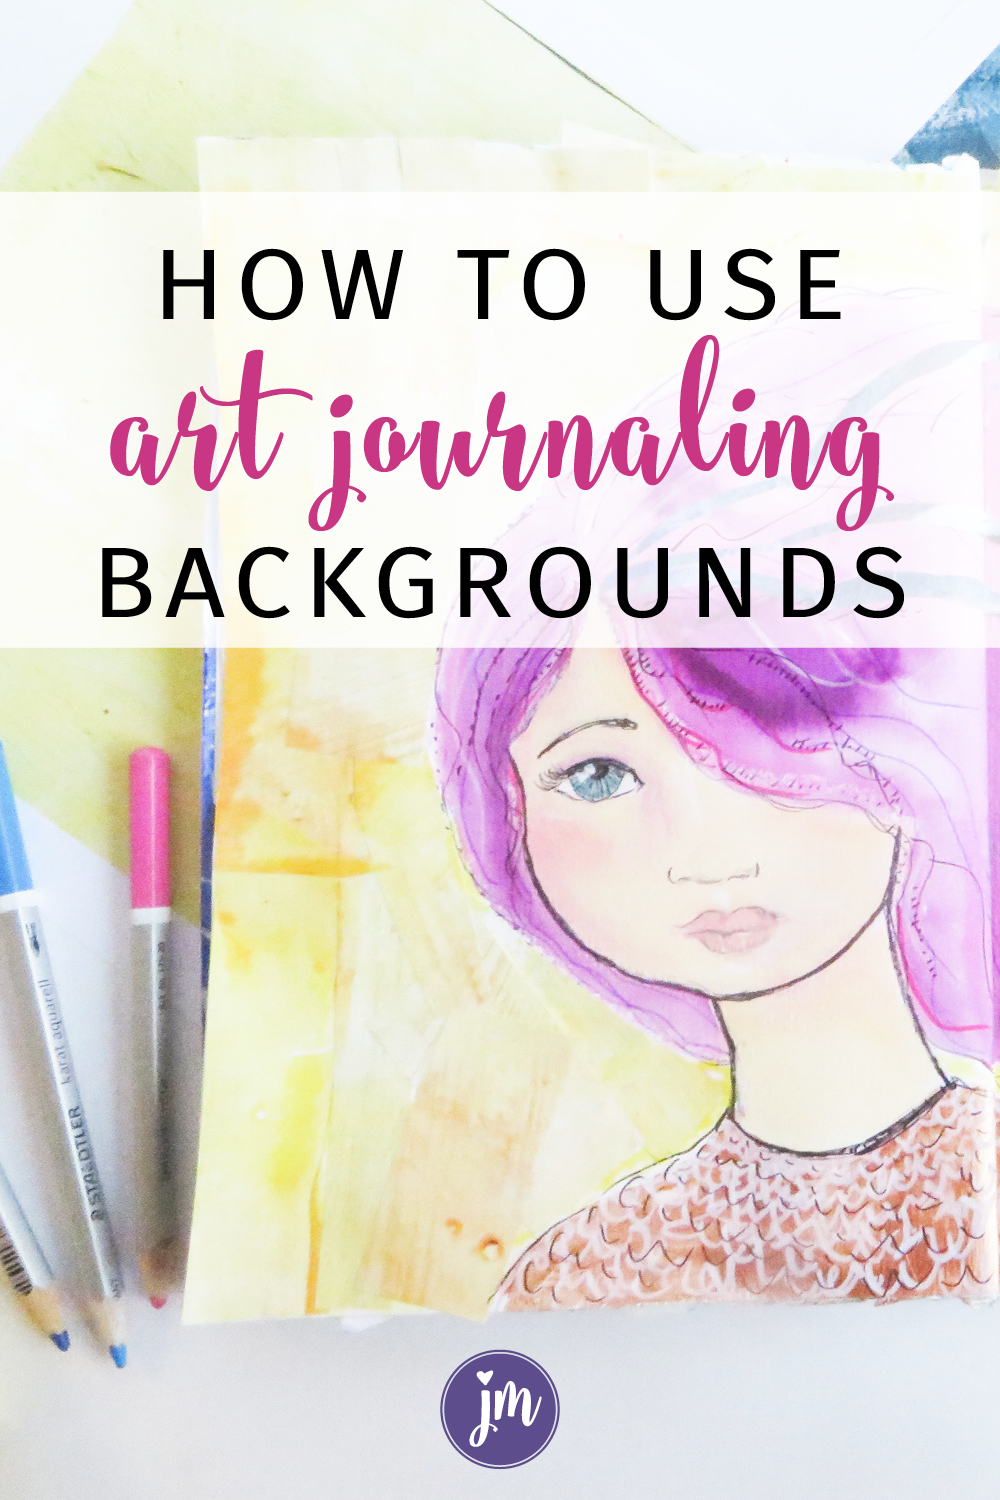 How to Use Printable Backgrounds for an Art Journal